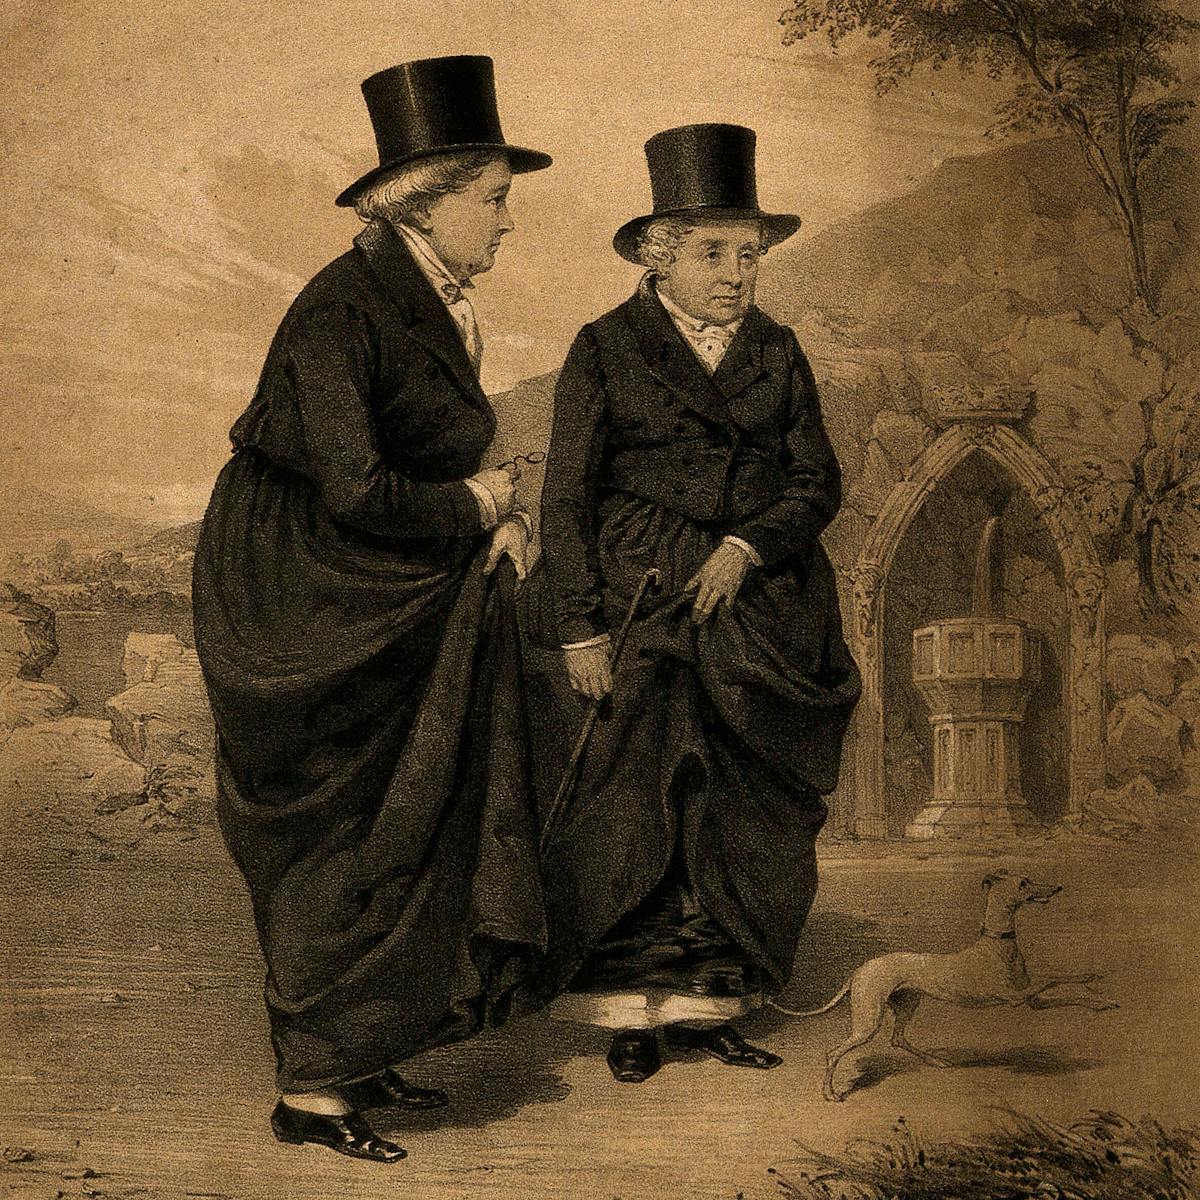 Etching showing 2 ladies in black overcoats and top hats standing together outside in a country scene. One holds a cane and the other a pair of spectacles. at their feet is a small dog, mid jump. Behind them are trees, rocks and carved stone fountain.